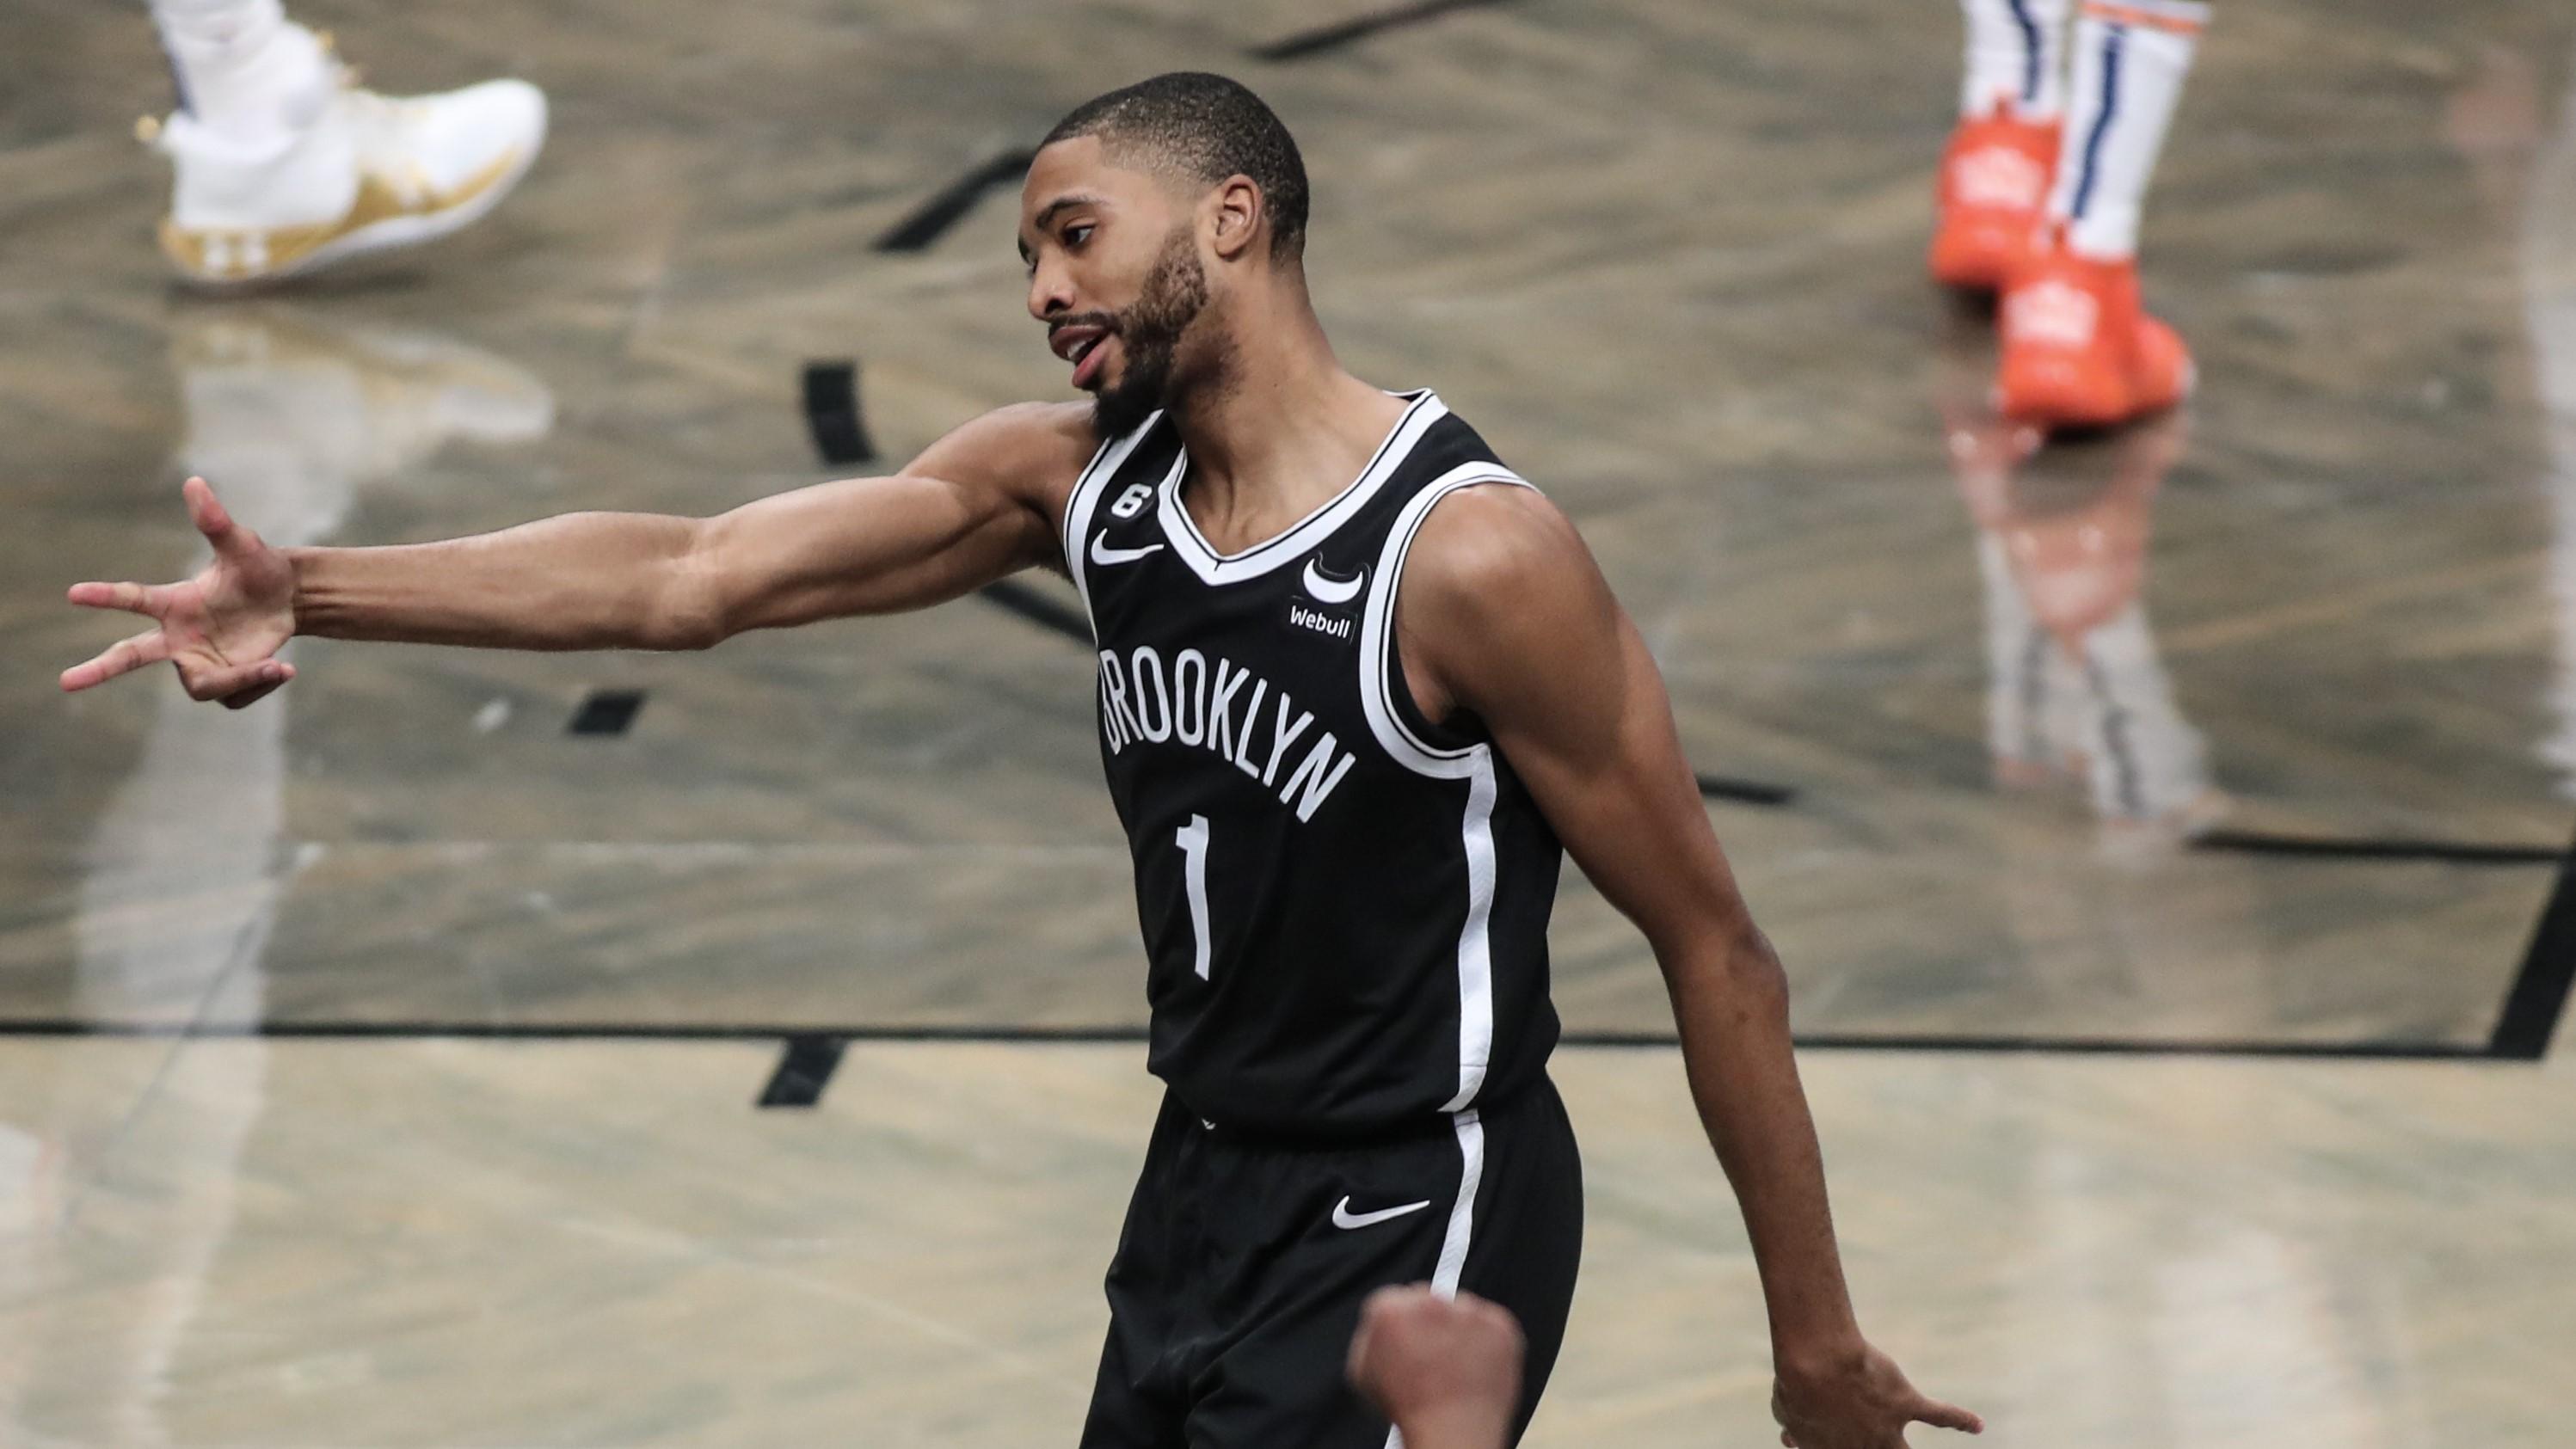 Apr 20, 2023; Brooklyn, New York, USA; Brooklyn Nets forward Mikal Bridges (1) celebrates after scoring during game three of the 2023 NBA playoffs against the Philadelphia 76ers at Barclays Center. Mandatory Credit: Wendell Cruz-USA TODAY Sports / © Wendell Cruz-USA TODAY Sports